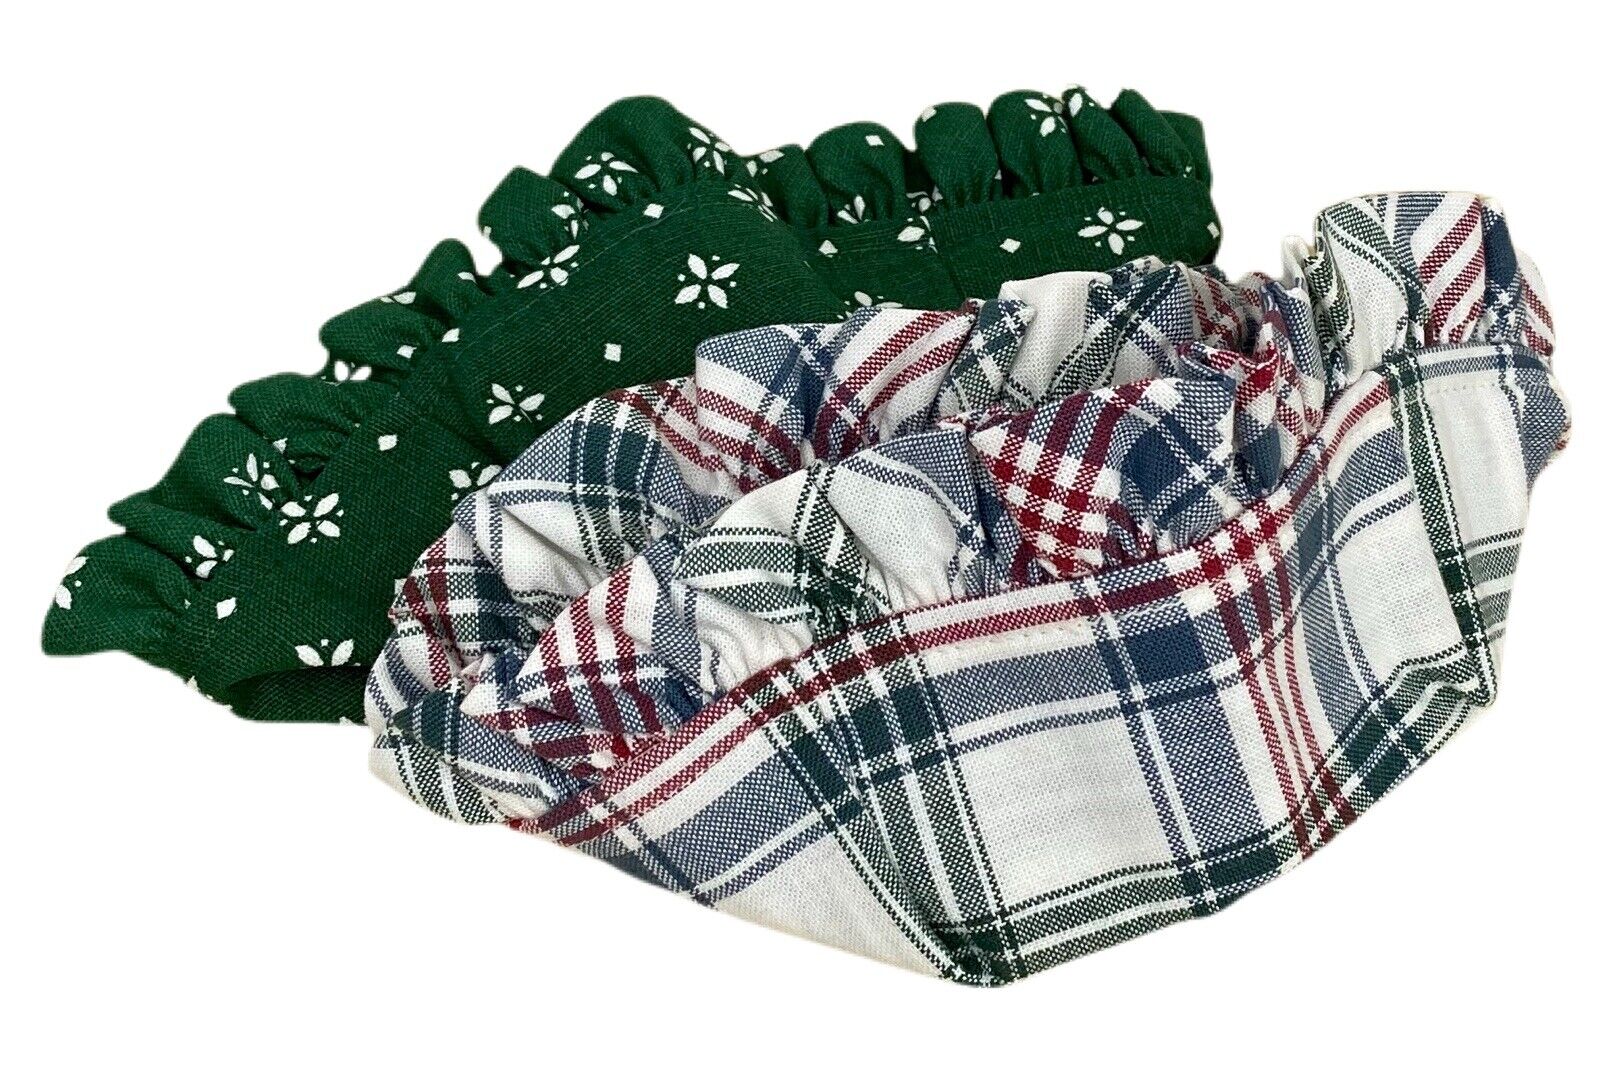 Longaberger Woven Traditions Green and Market Plaid Liners for Tarragon Basket